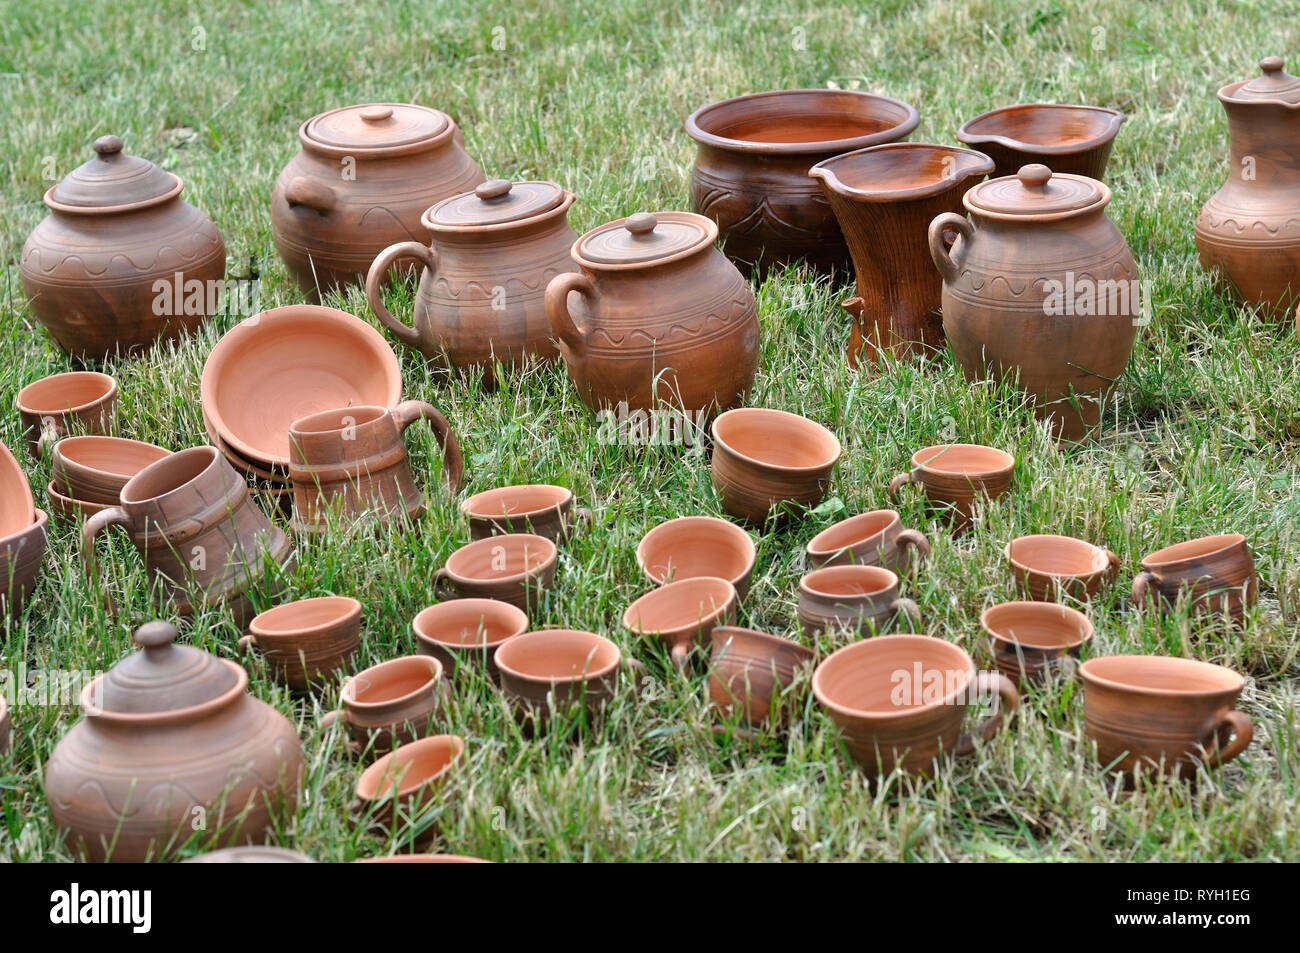 Lots of traditional ukrainian handmade clay pottery production on the green grass Stock Photo